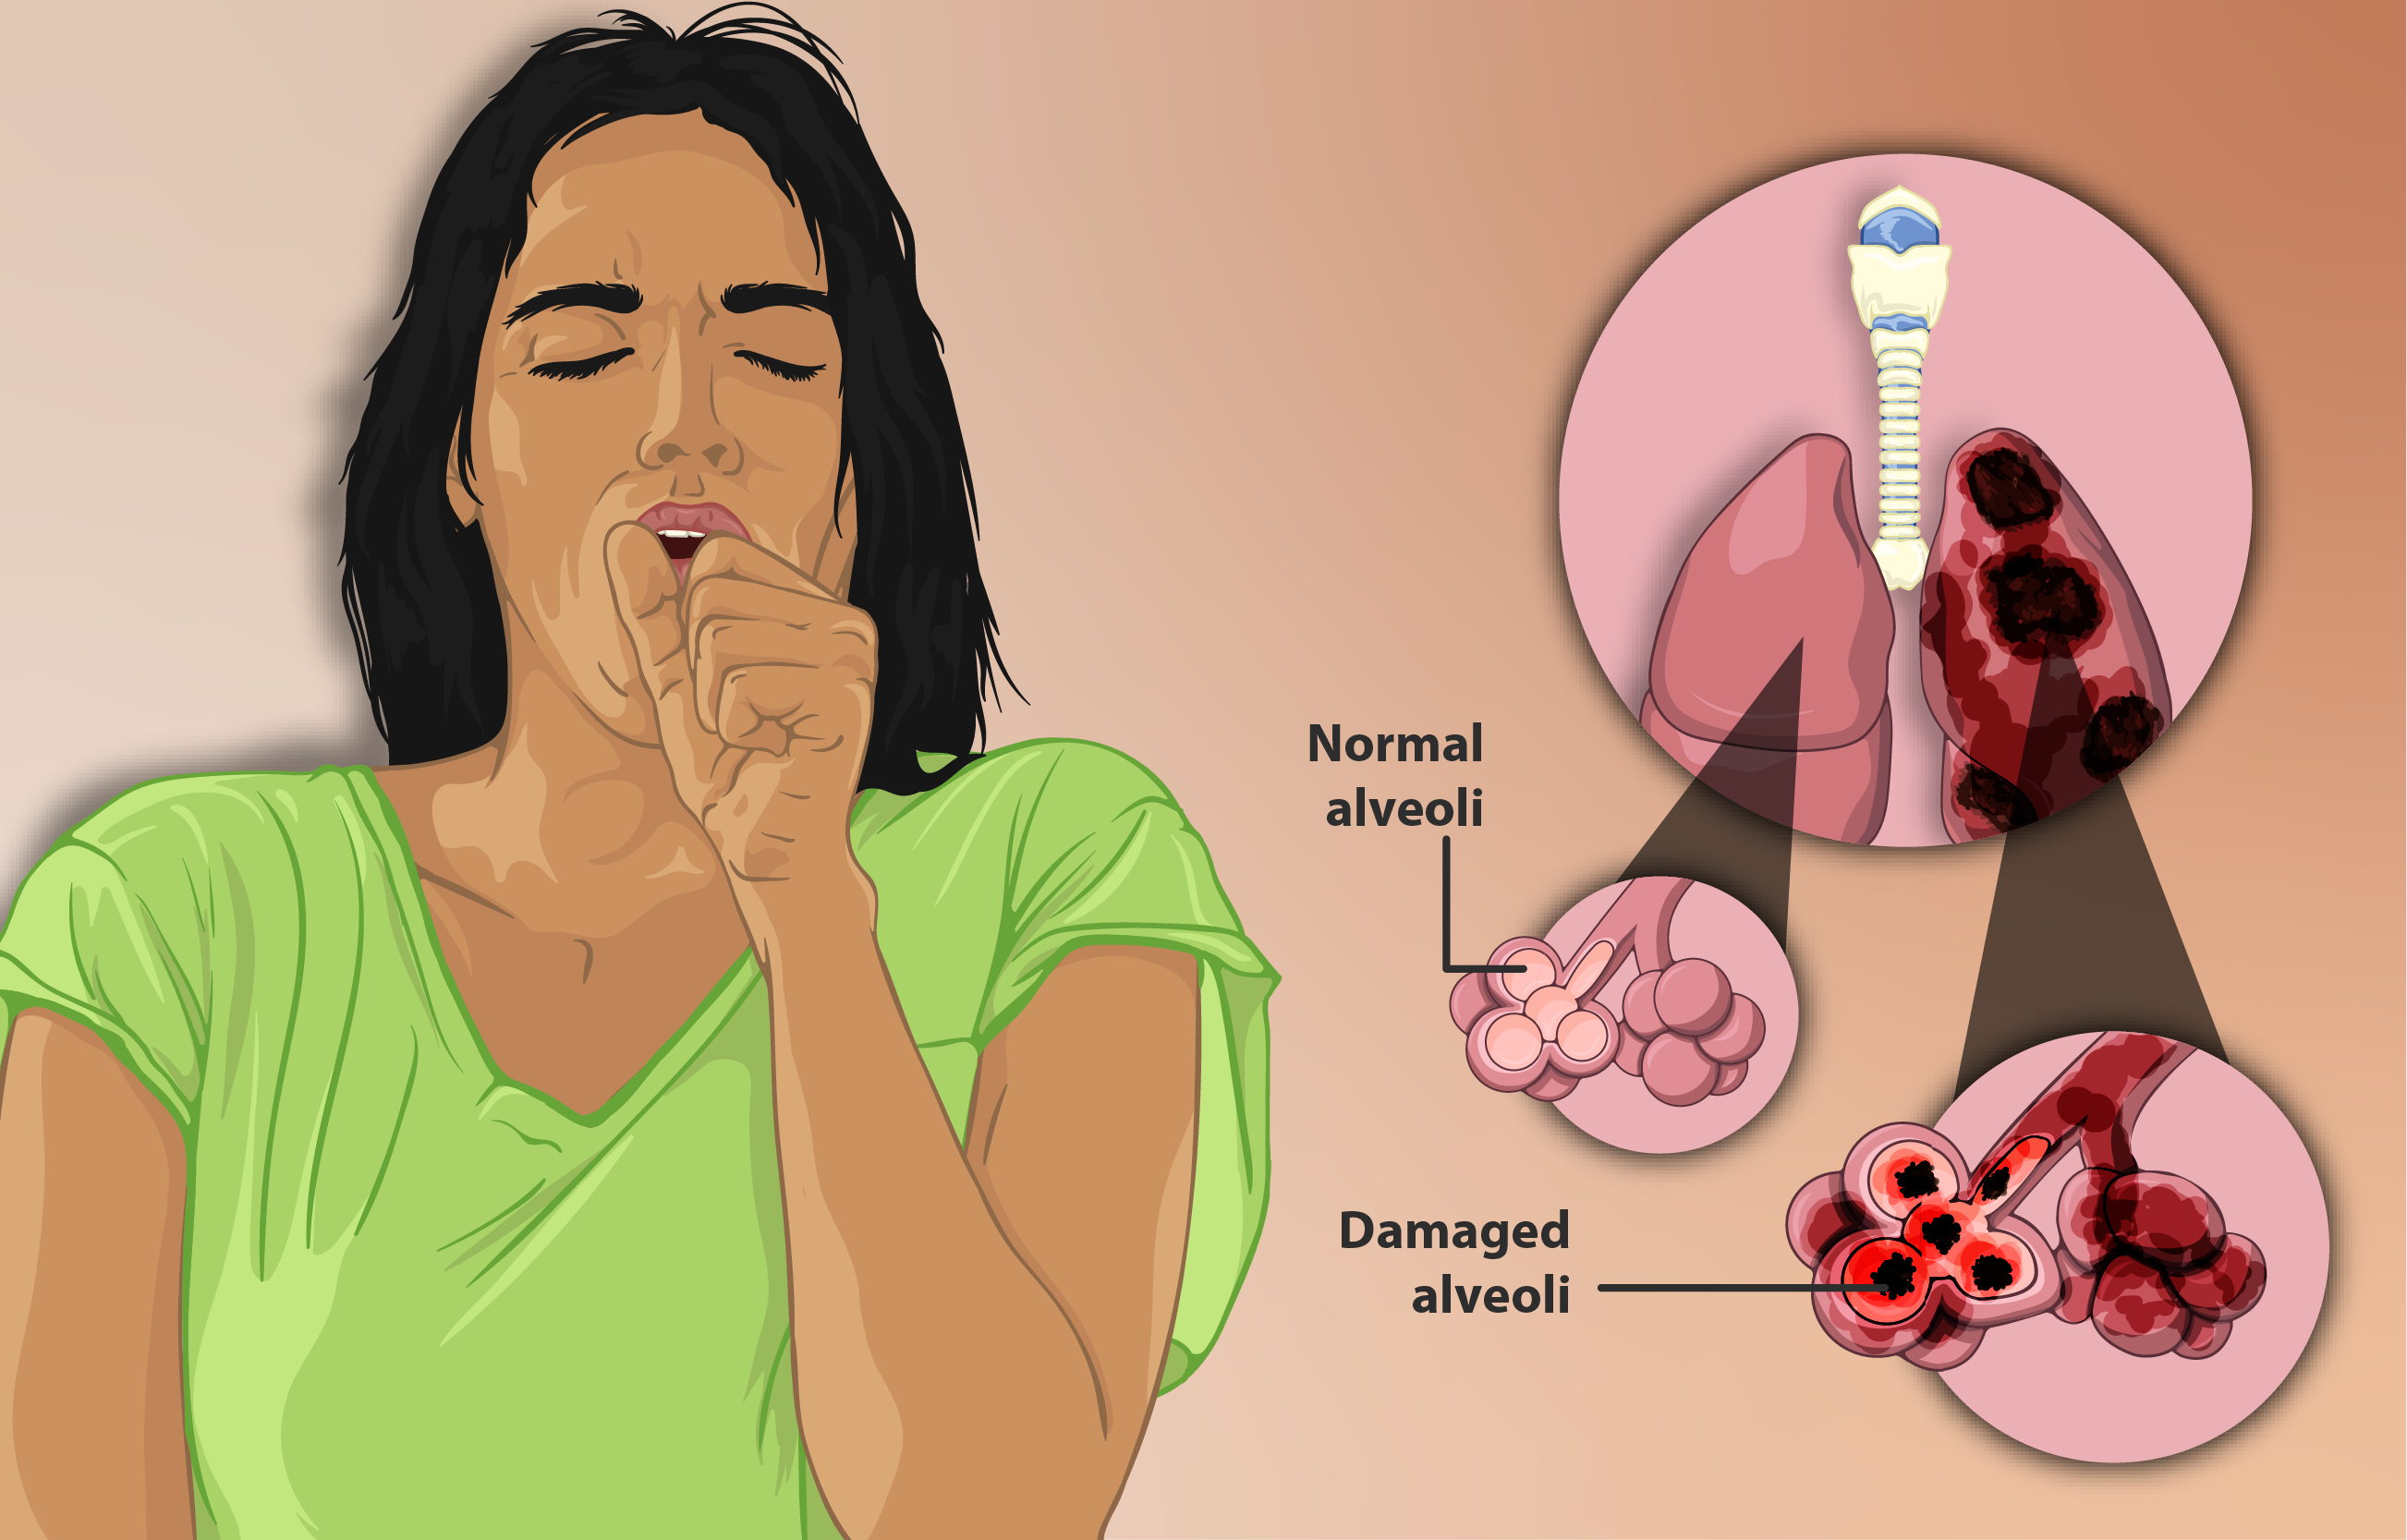 Depiction_of_a_woman_suffering_from_Emphysema,_a_type_of_Chronic_Obstructive_Pulmonary_Disease